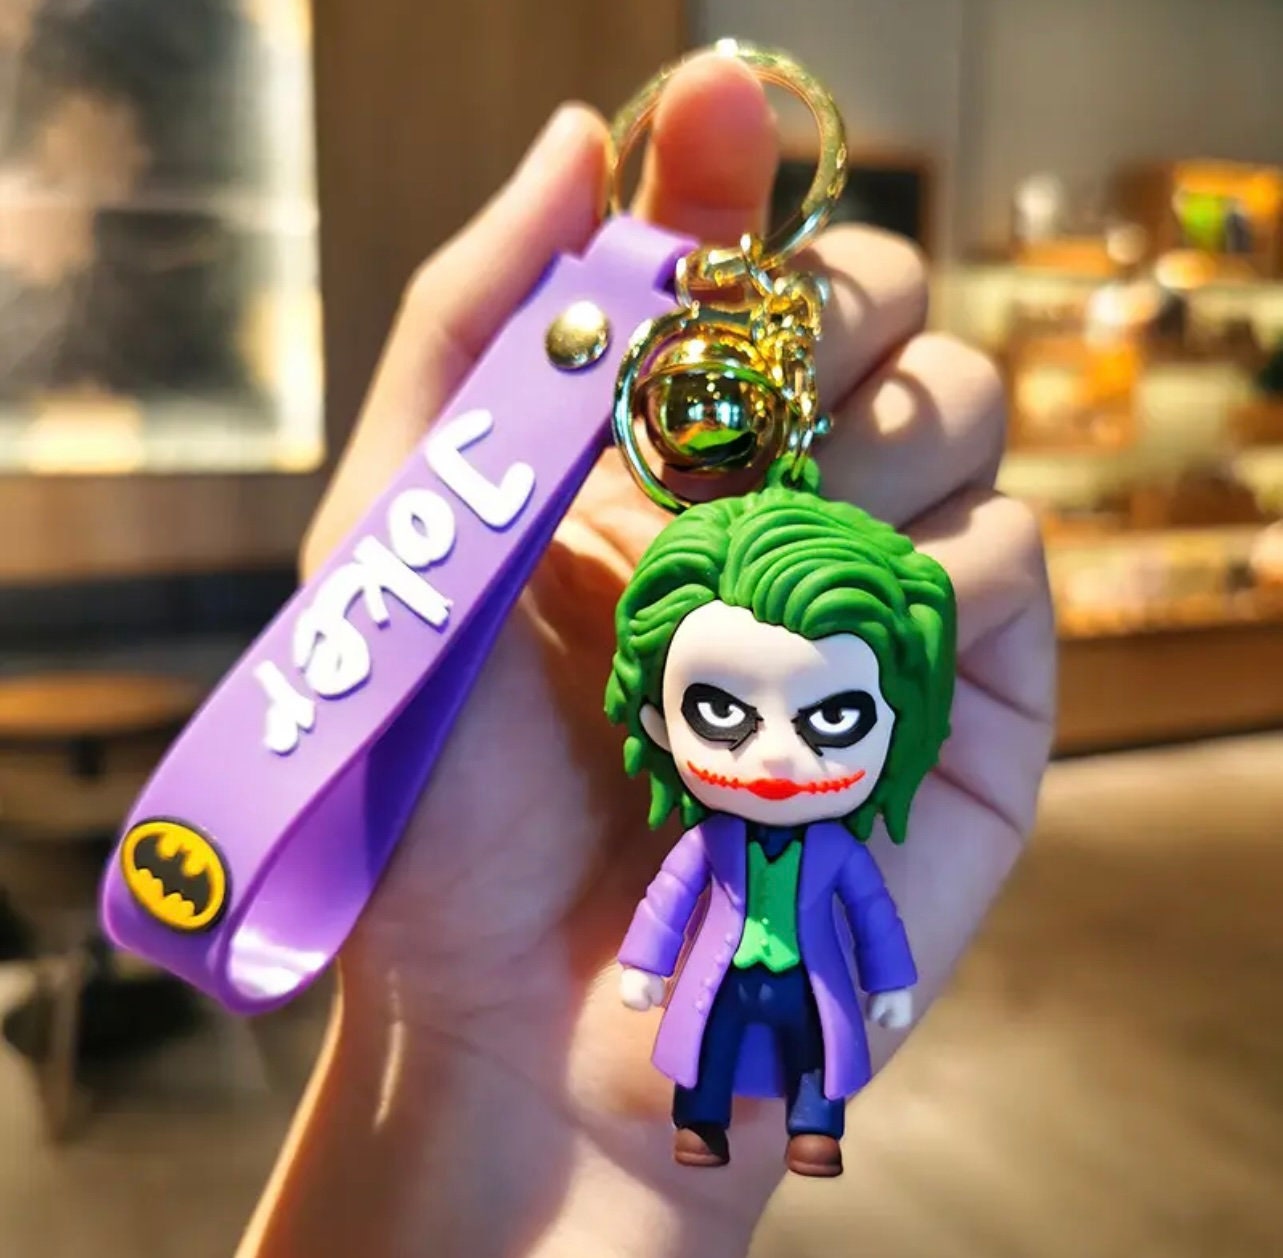 The Joker Print Lanyard Key Chain Neck Strap for Movie Fans Keychain, ID Badge Holder, Cell Phone, and Charms Neck Strap (The Joker-LY)